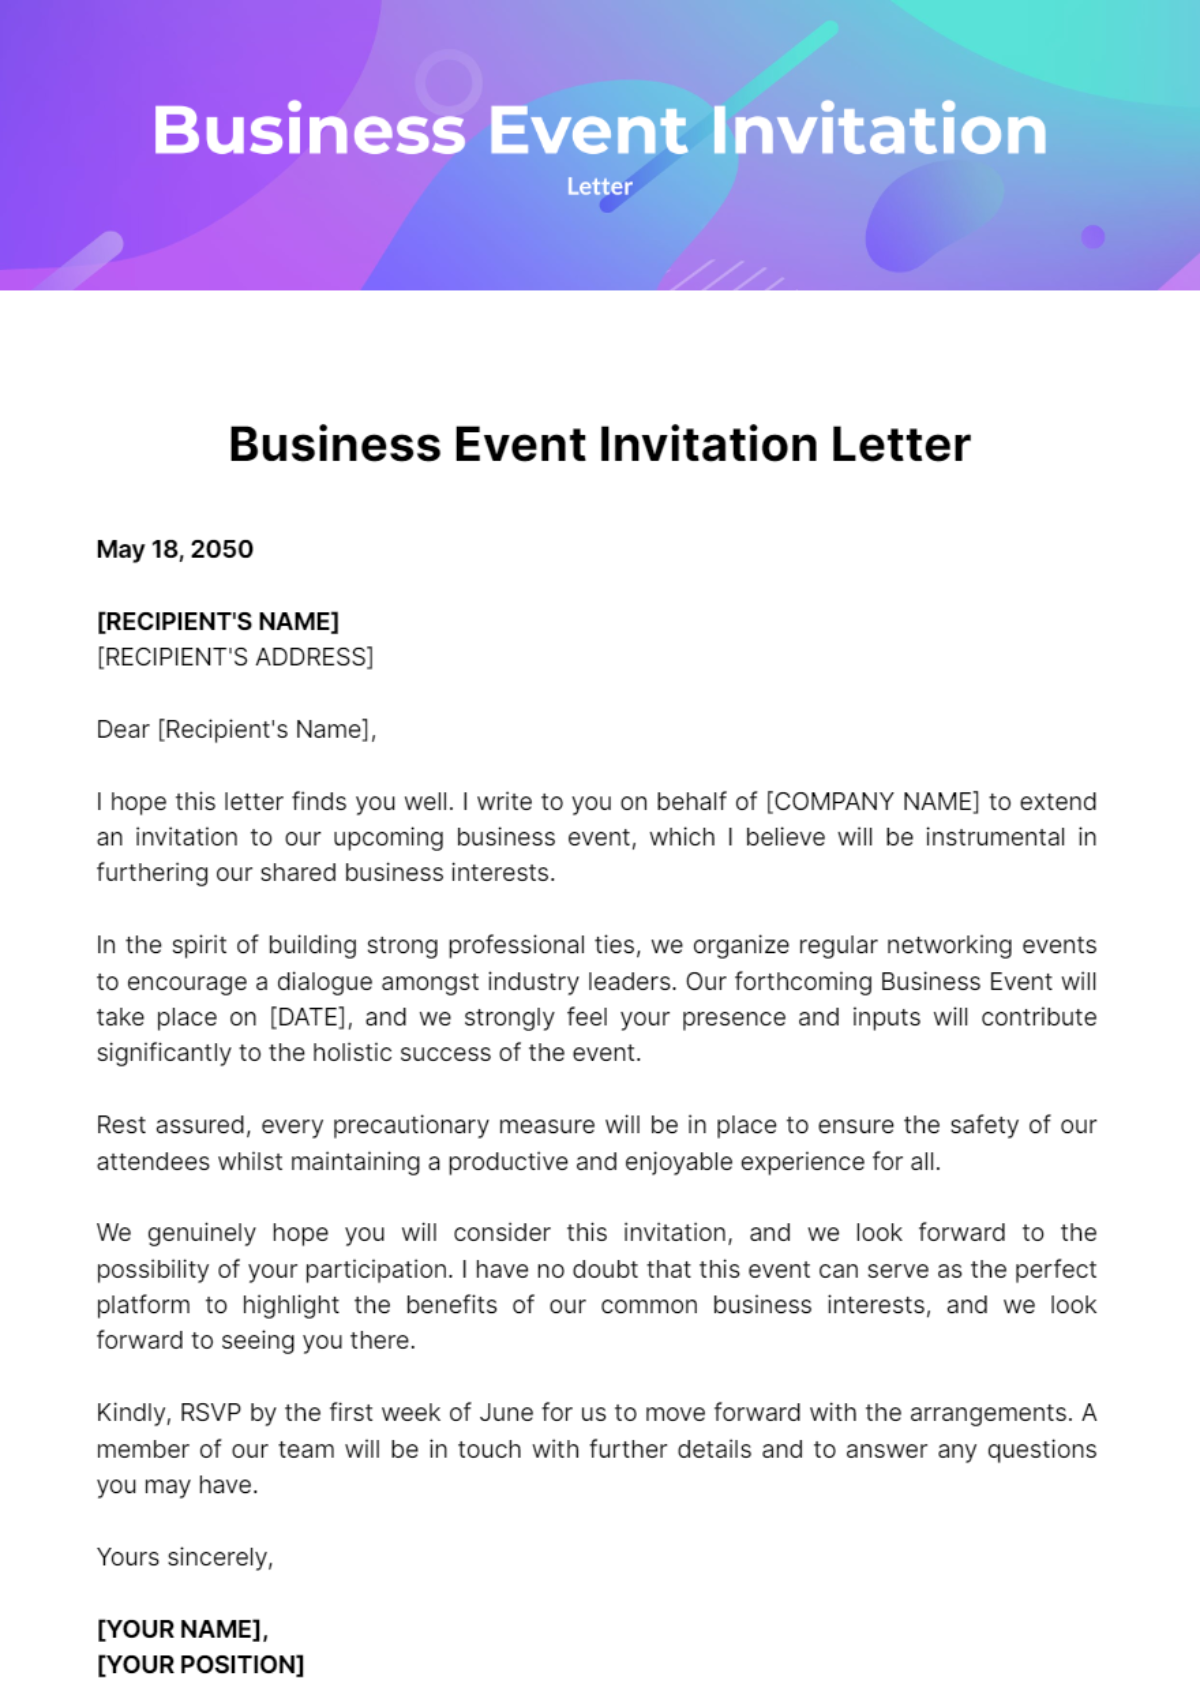 Free Business Event Invitation Letter Template